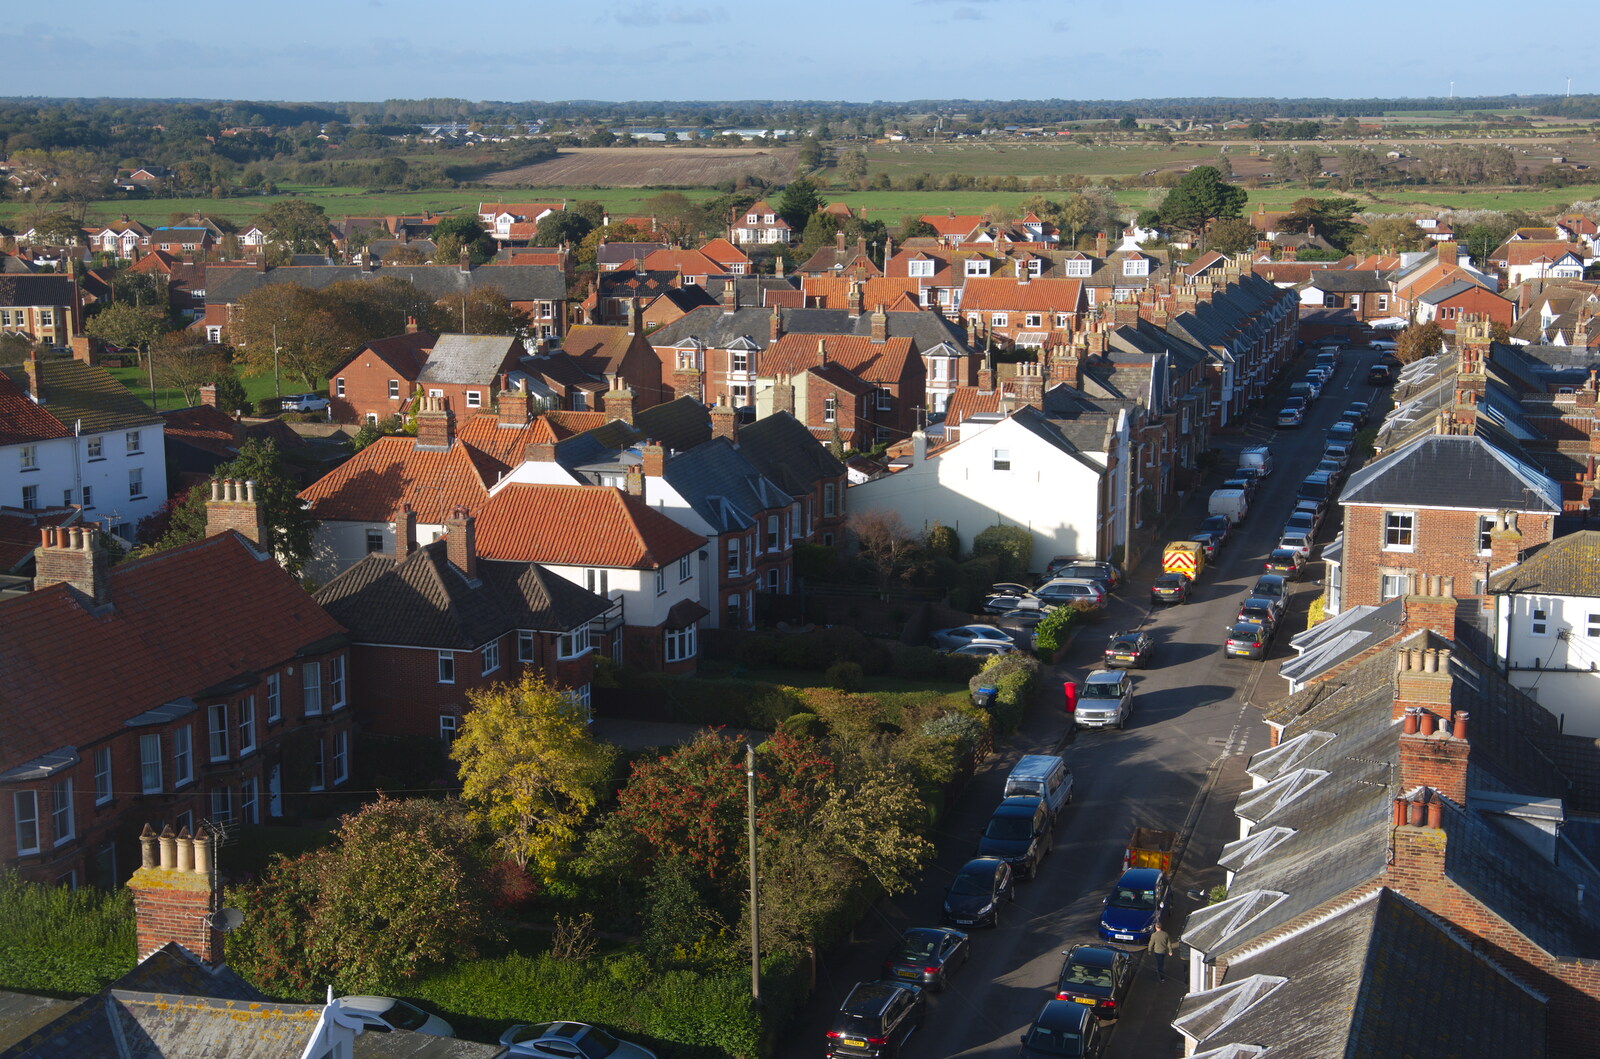 Looking down Stradbroke Road, Southwold from A Trip up a Lighthouse, Southwold, Suffolk - 27th October 2019